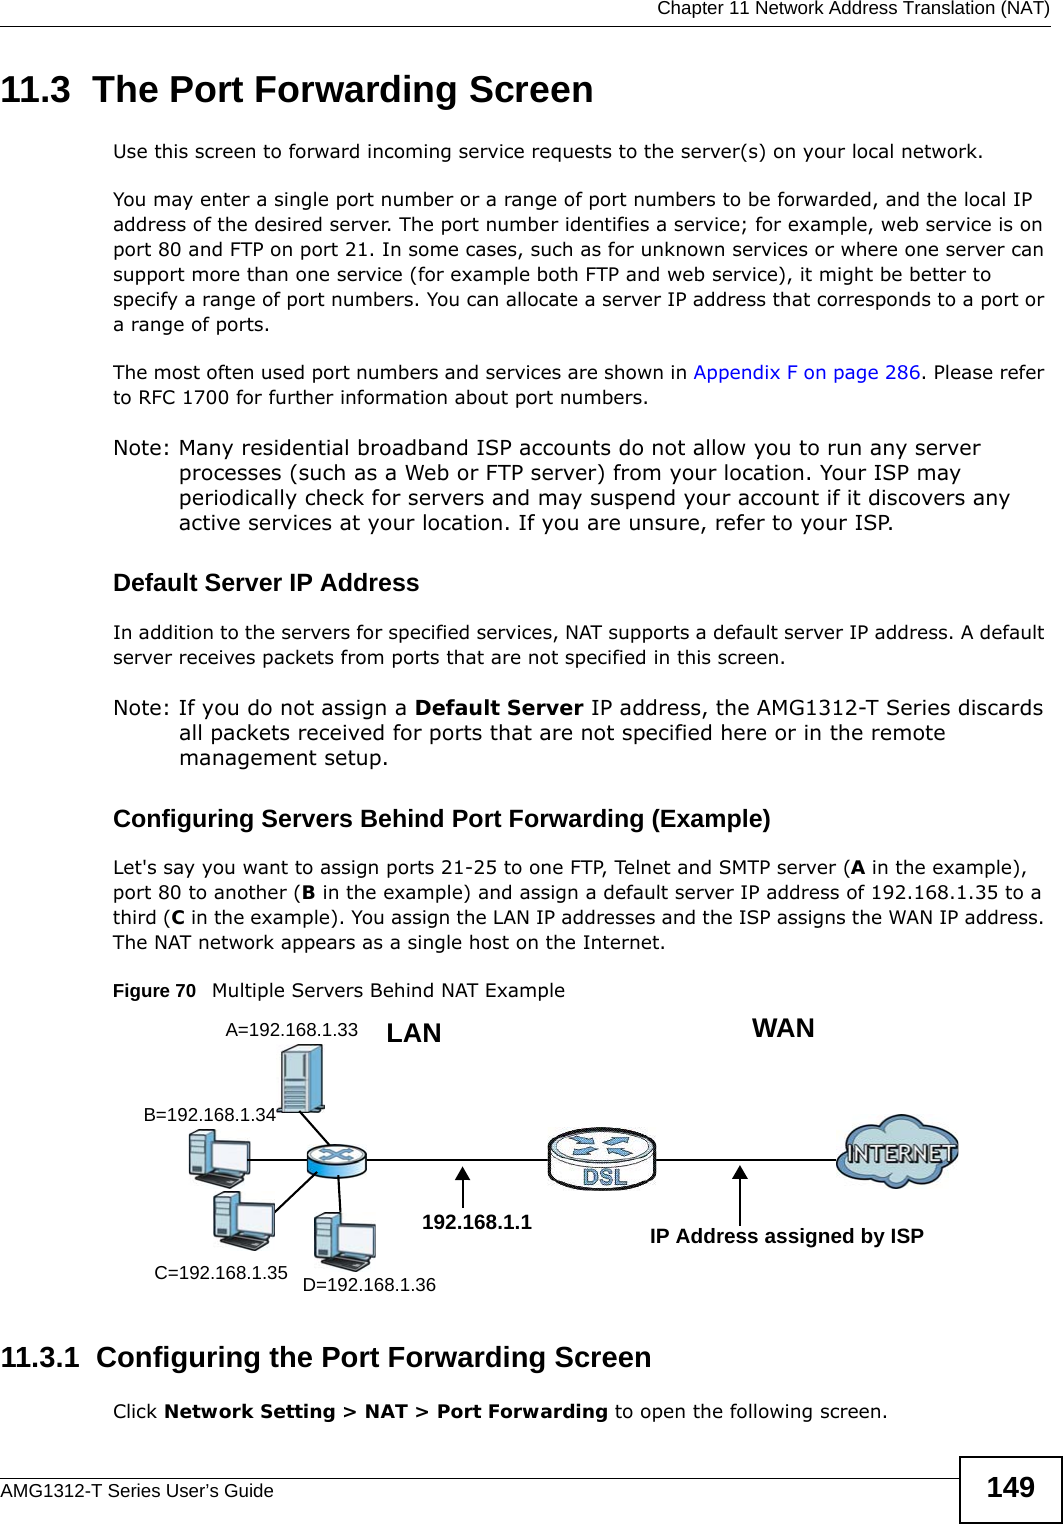  Chapter 11 Network Address Translation (NAT)AMG1312-T Series User’s Guide 14911.3  The Port Forwarding ScreenUse this screen to forward incoming service requests to the server(s) on your local network.You may enter a single port number or a range of port numbers to be forwarded, and the local IP address of the desired server. The port number identifies a service; for example, web service is on port 80 and FTP on port 21. In some cases, such as for unknown services or where one server can support more than one service (for example both FTP and web service), it might be better to specify a range of port numbers. You can allocate a server IP address that corresponds to a port or a range of ports.The most often used port numbers and services are shown in Appendix F on page 286. Please refer to RFC 1700 for further information about port numbers. Note: Many residential broadband ISP accounts do not allow you to run any server processes (such as a Web or FTP server) from your location. Your ISP may periodically check for servers and may suspend your account if it discovers any active services at your location. If you are unsure, refer to your ISP.Default Server IP AddressIn addition to the servers for specified services, NAT supports a default server IP address. A default server receives packets from ports that are not specified in this screen.Note: If you do not assign a Default Server IP address, the AMG1312-T Series discards all packets received for ports that are not specified here or in the remote management setup.Configuring Servers Behind Port Forwarding (Example)Let&apos;s say you want to assign ports 21-25 to one FTP, Telnet and SMTP server (A in the example), port 80 to another (B in the example) and assign a default server IP address of 192.168.1.35 to a third (C in the example). You assign the LAN IP addresses and the ISP assigns the WAN IP address. The NAT network appears as a single host on the Internet.Figure 70   Multiple Servers Behind NAT Example11.3.1  Configuring the Port Forwarding ScreenClick Network Setting &gt; NAT &gt; Port Forwarding to open the following screen.A=192.168.1.33D=192.168.1.36C=192.168.1.35B=192.168.1.34WANLAN192.168.1.1 IP Address assigned by ISP